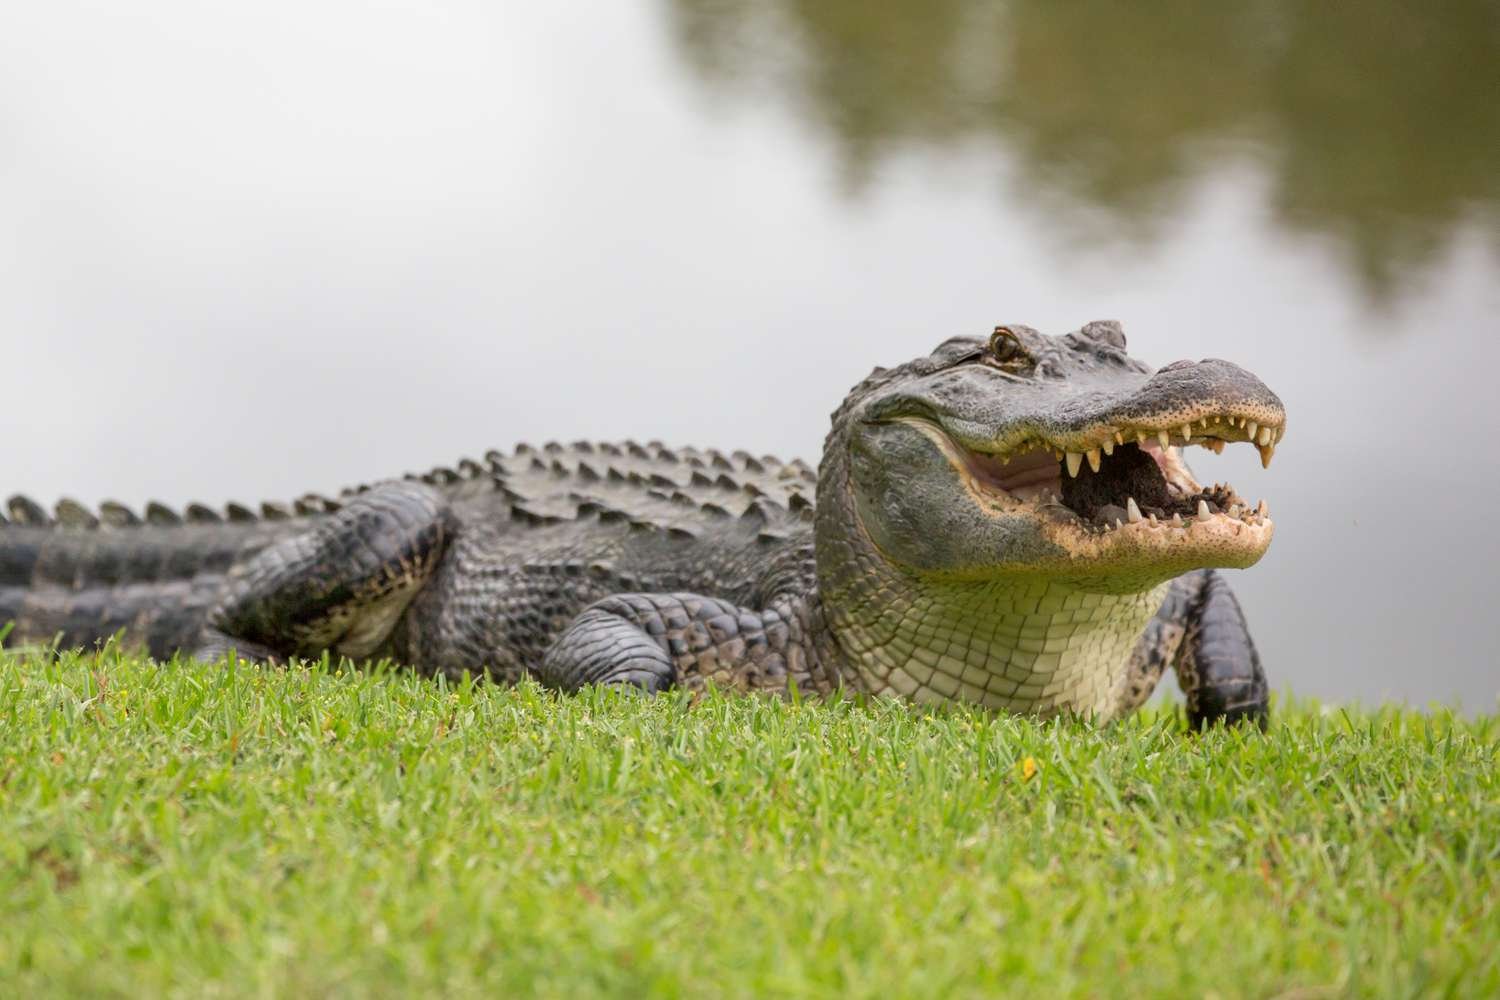 10+ Interesting Alligator Facts And Why We Should Protect Them